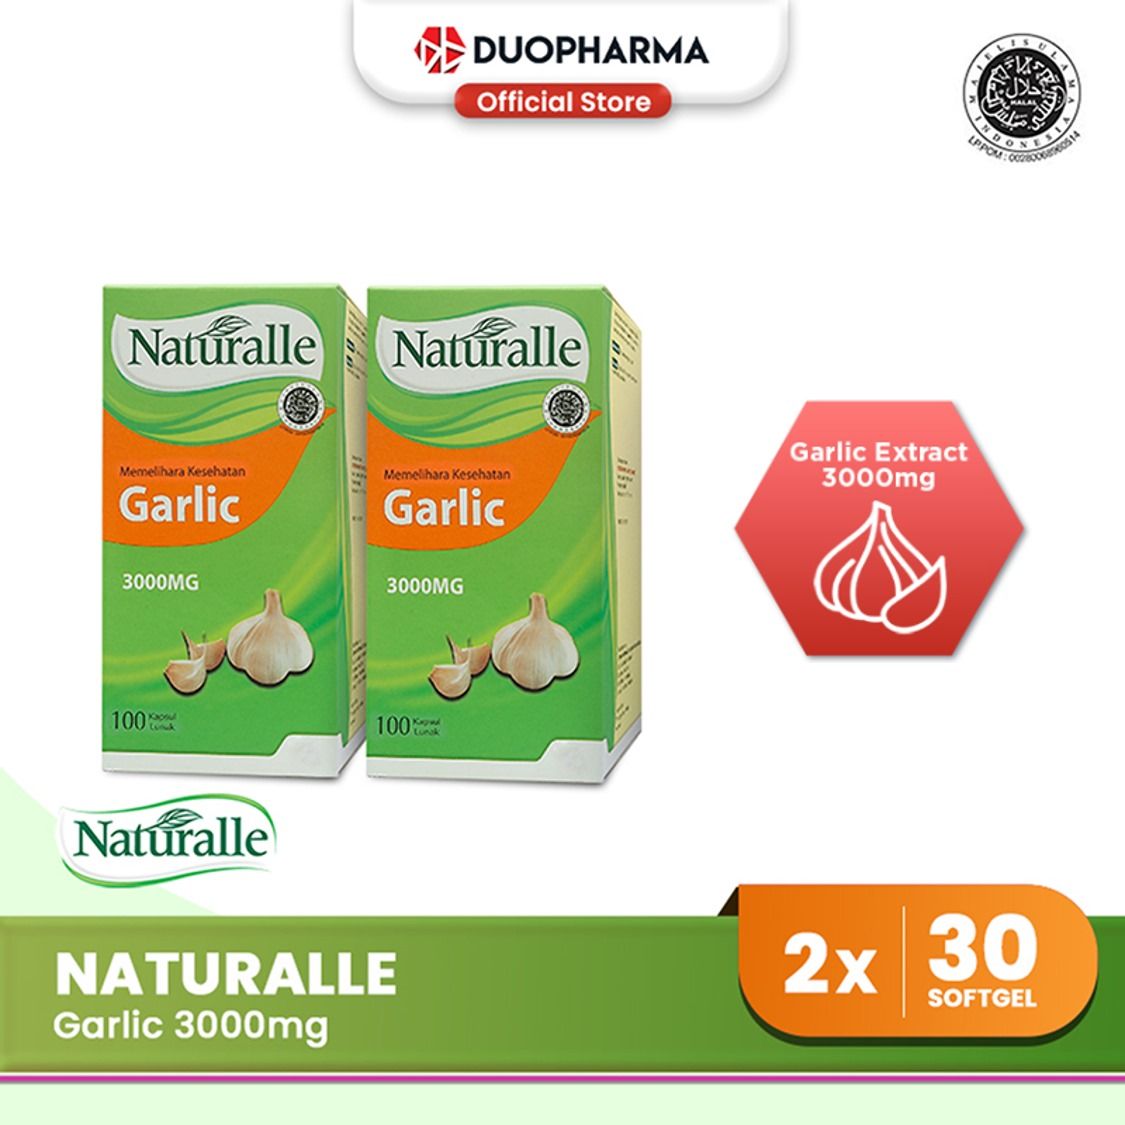 [Twin Pack] Naturalle Garlic Oil 3000mg Free Silcot Cleansing Cotton - 2